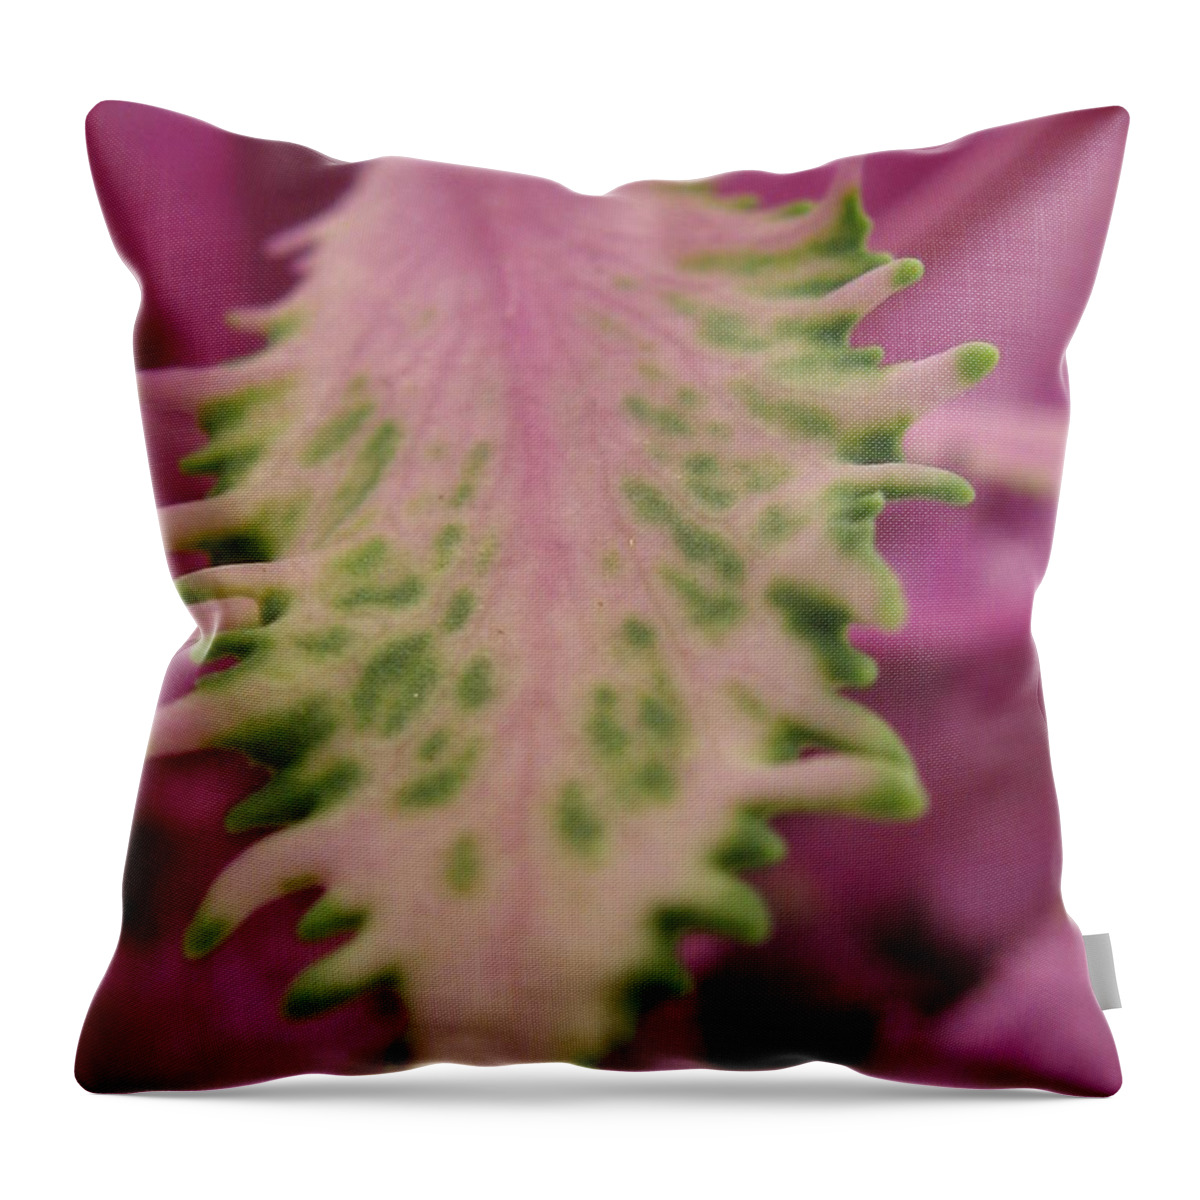 Flower Throw Pillow featuring the photograph Impeccable by Holy Hands